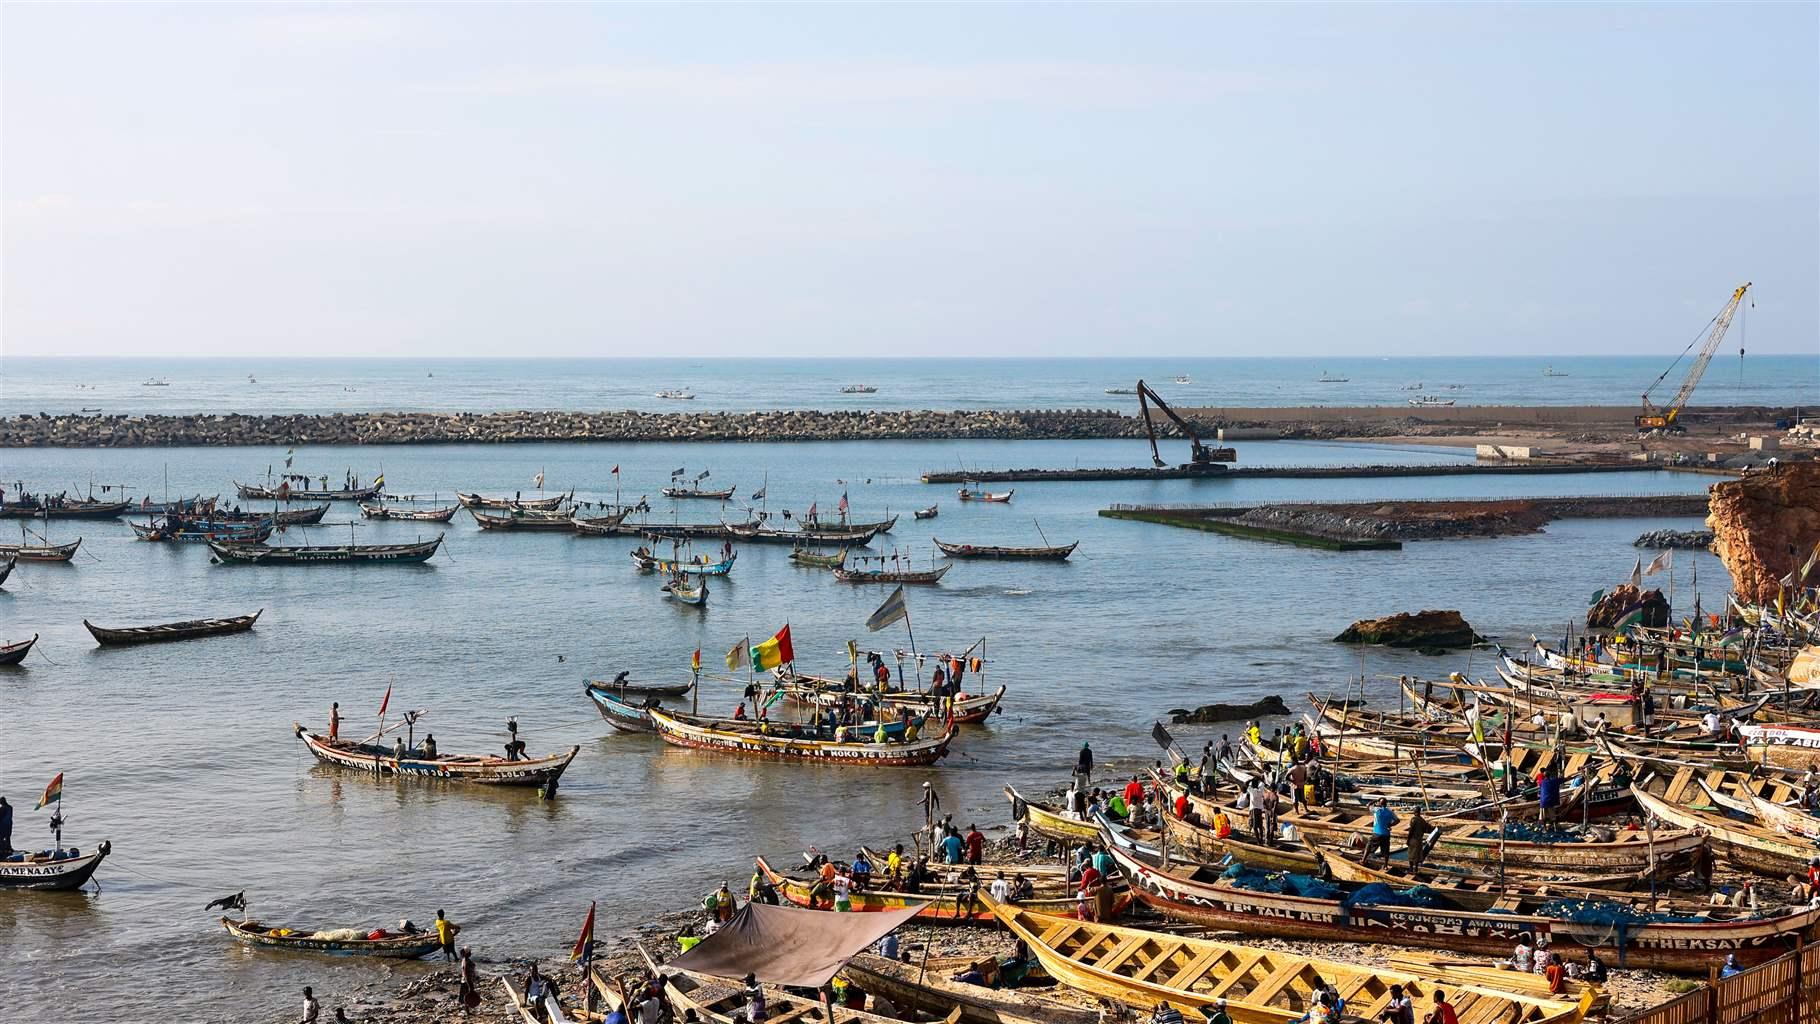 A busy harbor scene, with workers preparing fishing boats on a beach and a dozen or so vessels in the water, including two just off shore on which fishers excitedly wave the Ghanaian flag and another flag.